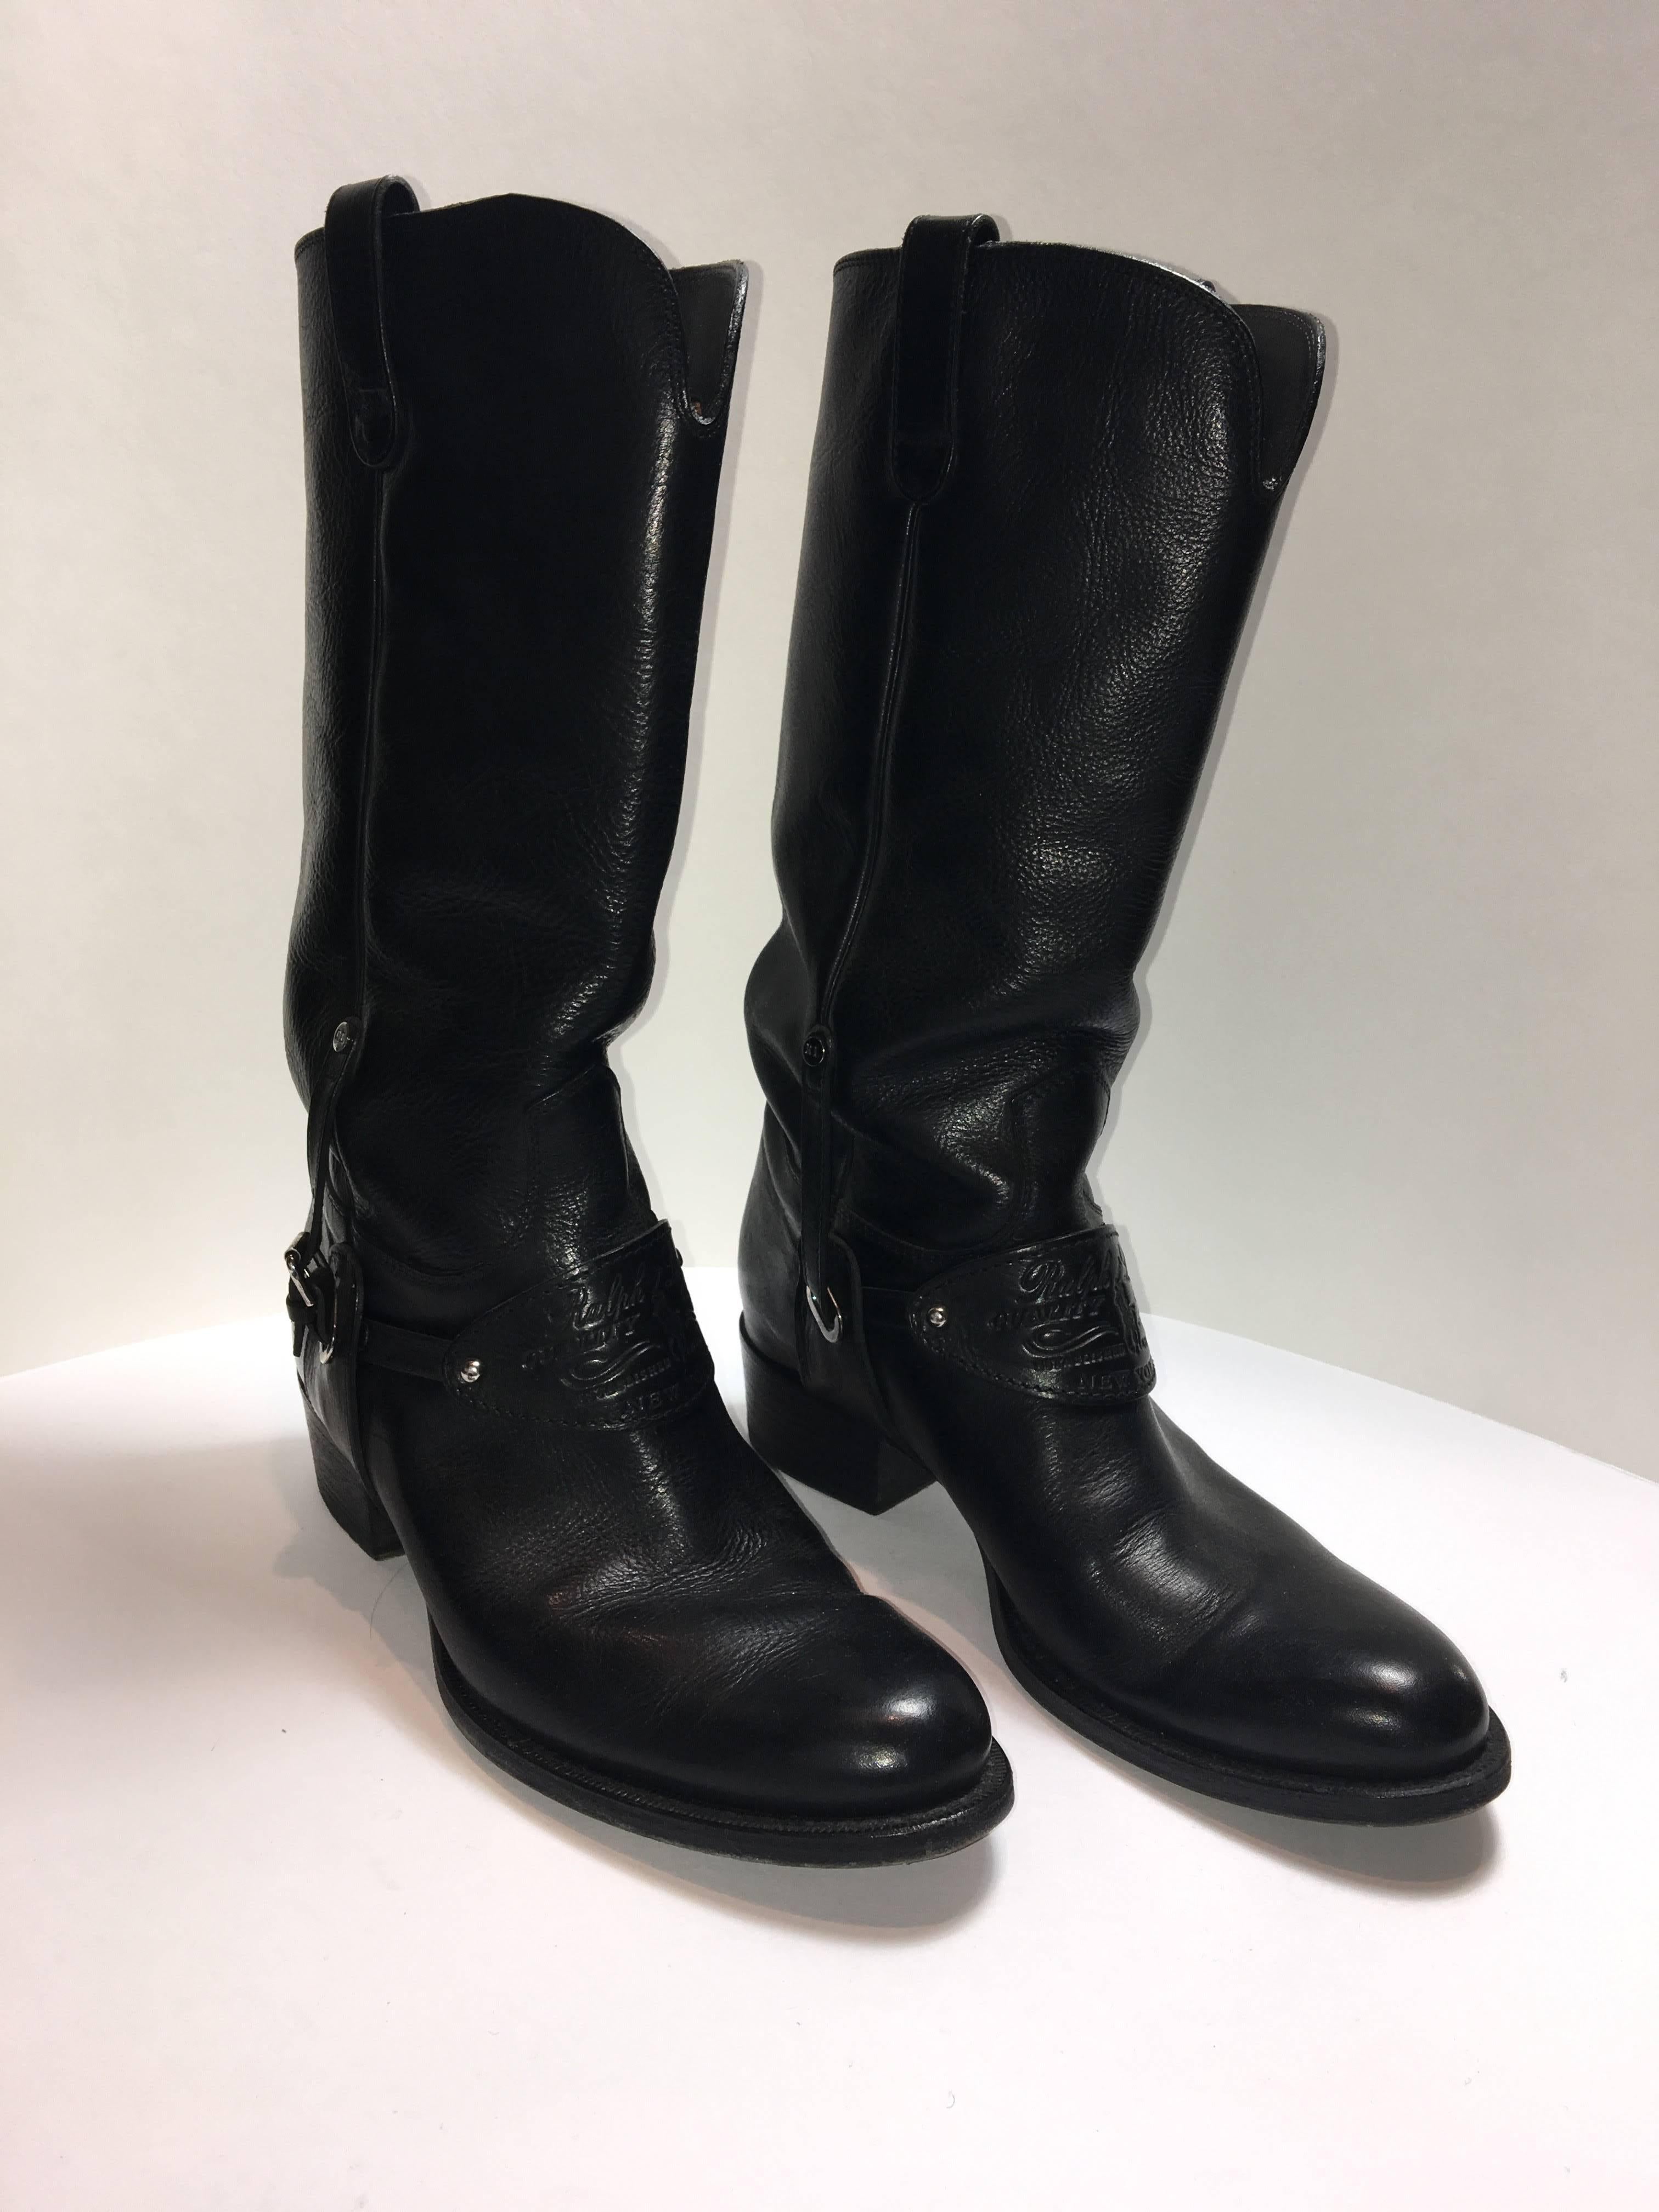 Ralph Lauren black leather boots with a short heel. Mid-Calf with pull tabs on both sides. 